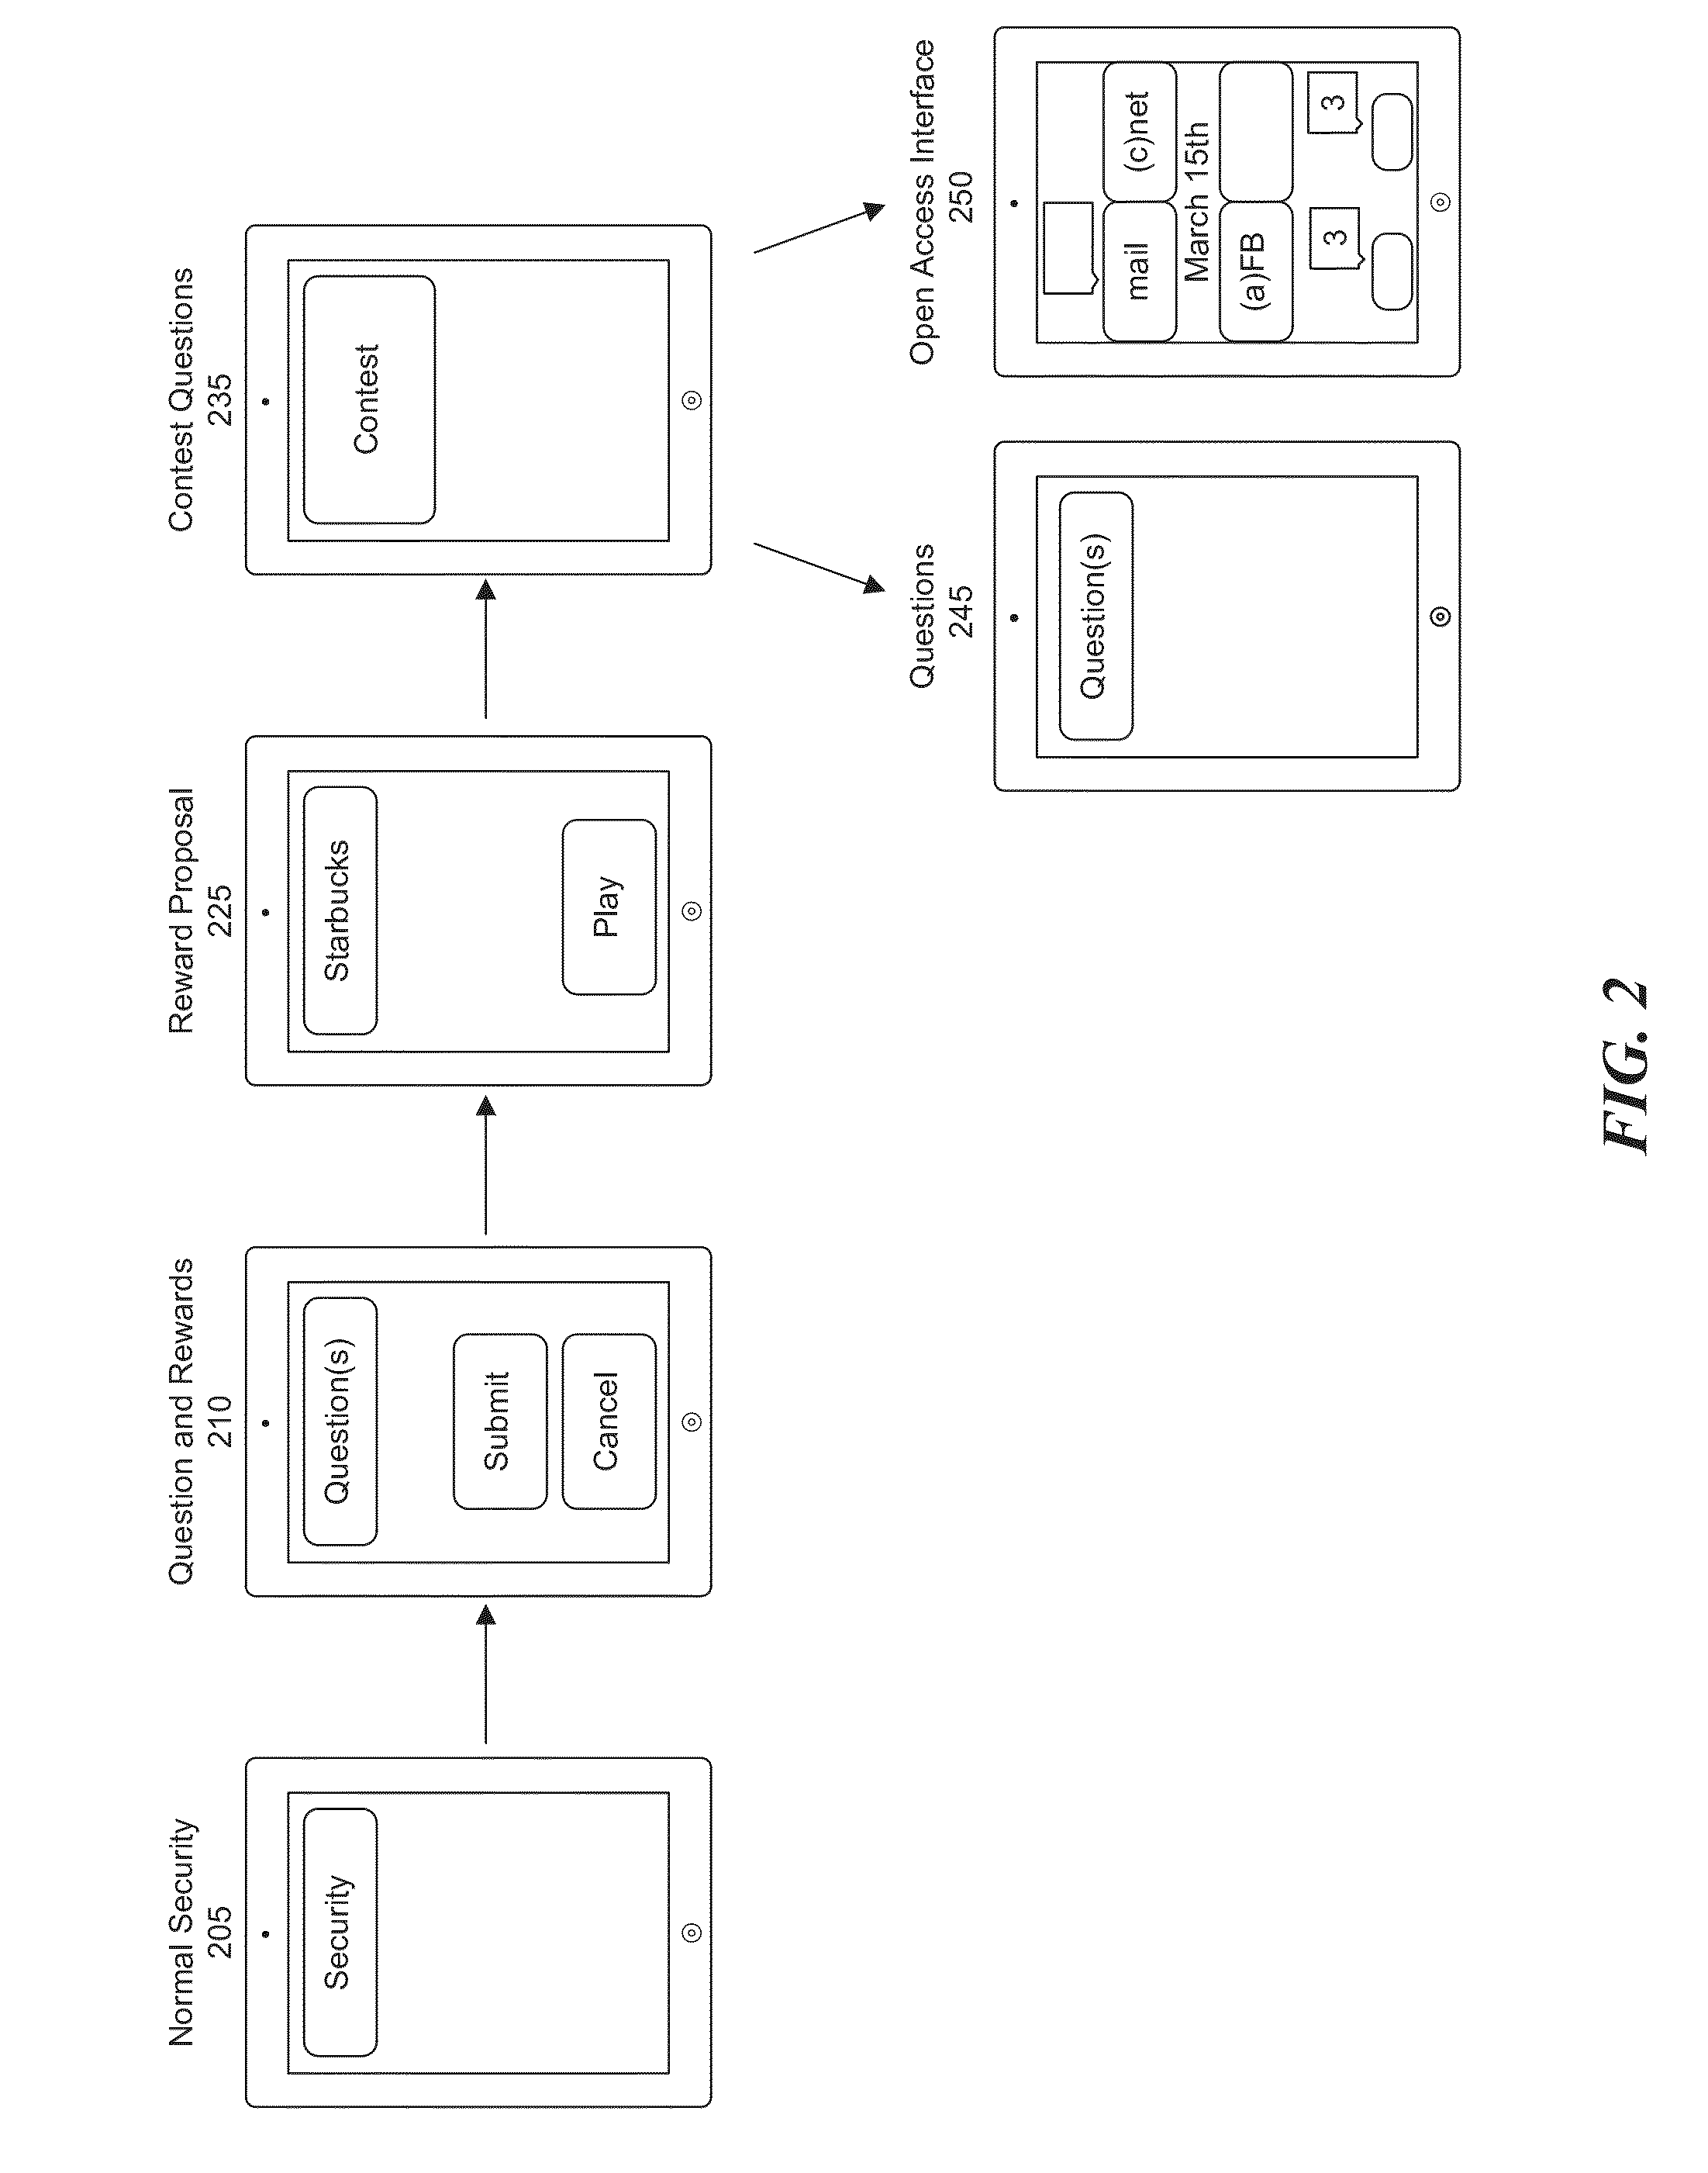 Method and system for integrated reward system for education related applications